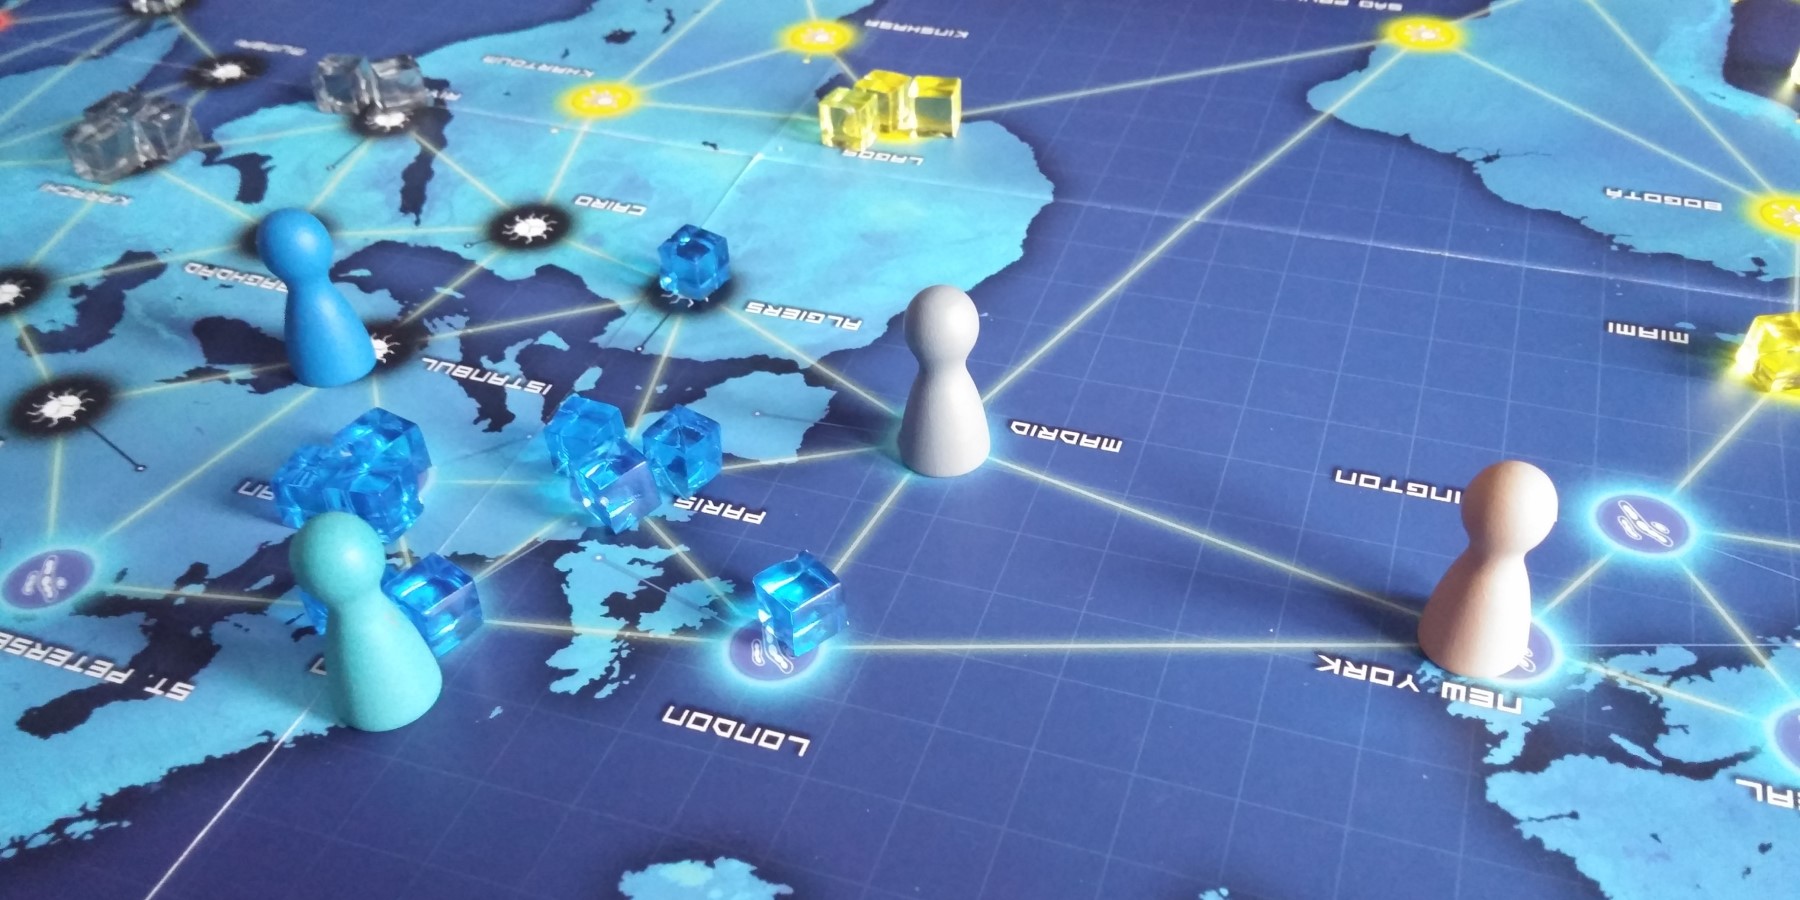 Pandemic board game close up view